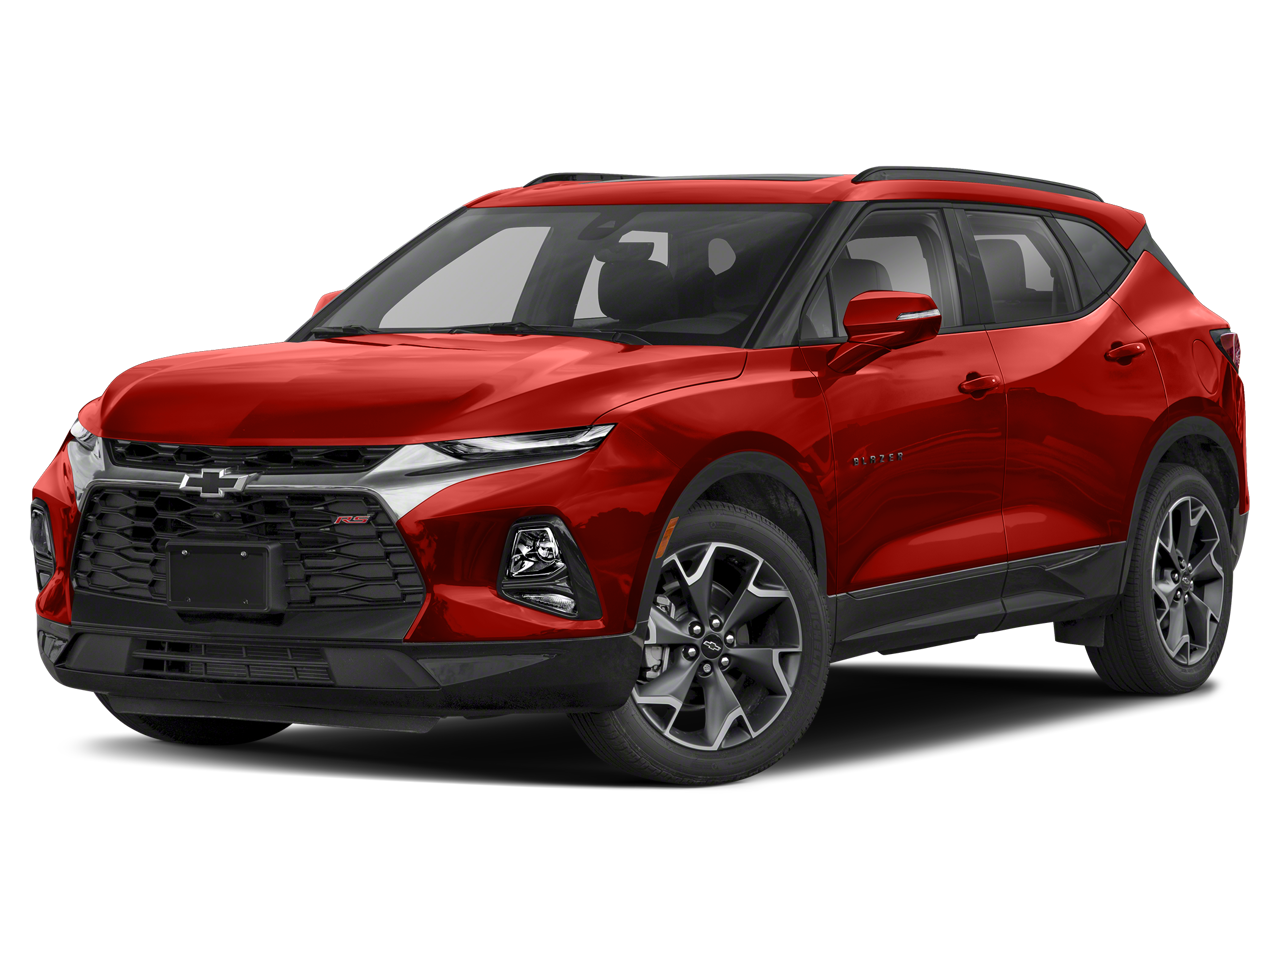 Used 2021 Chevrolet Blazer RS with VIN 3GNKBKRS2MS525974 for sale in Worthington, Minnesota